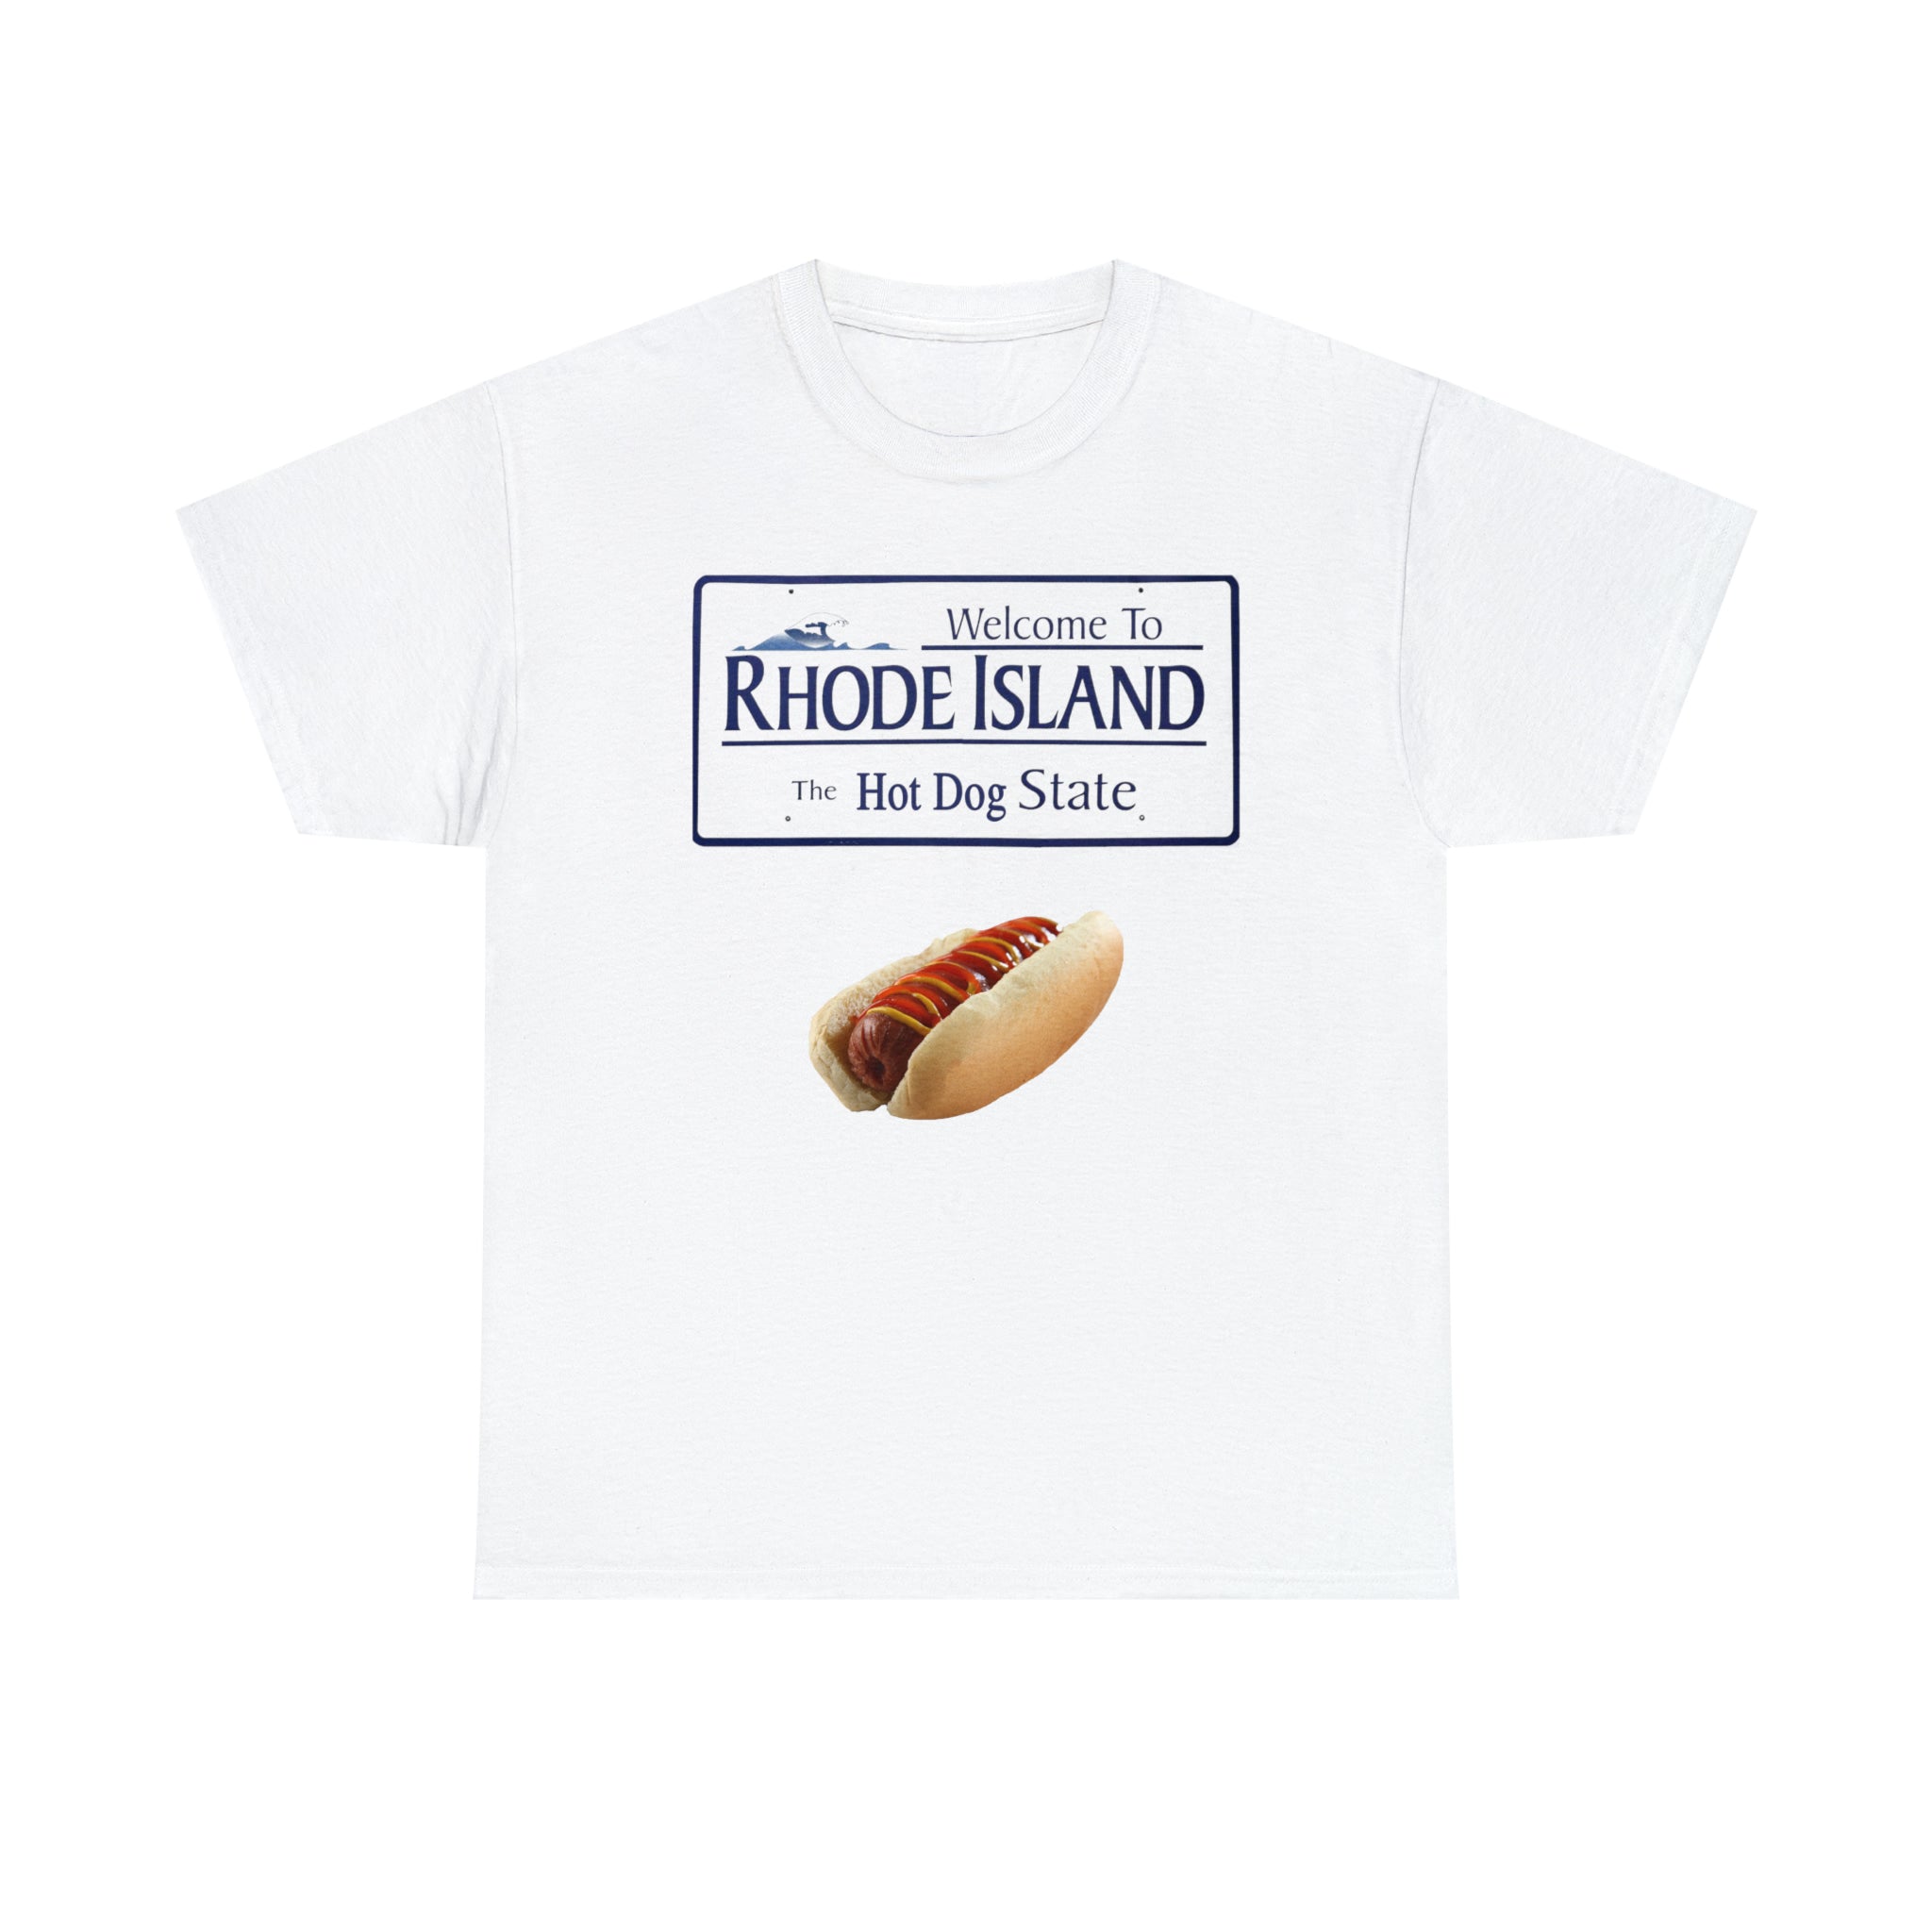 "The Hot Dog State" t